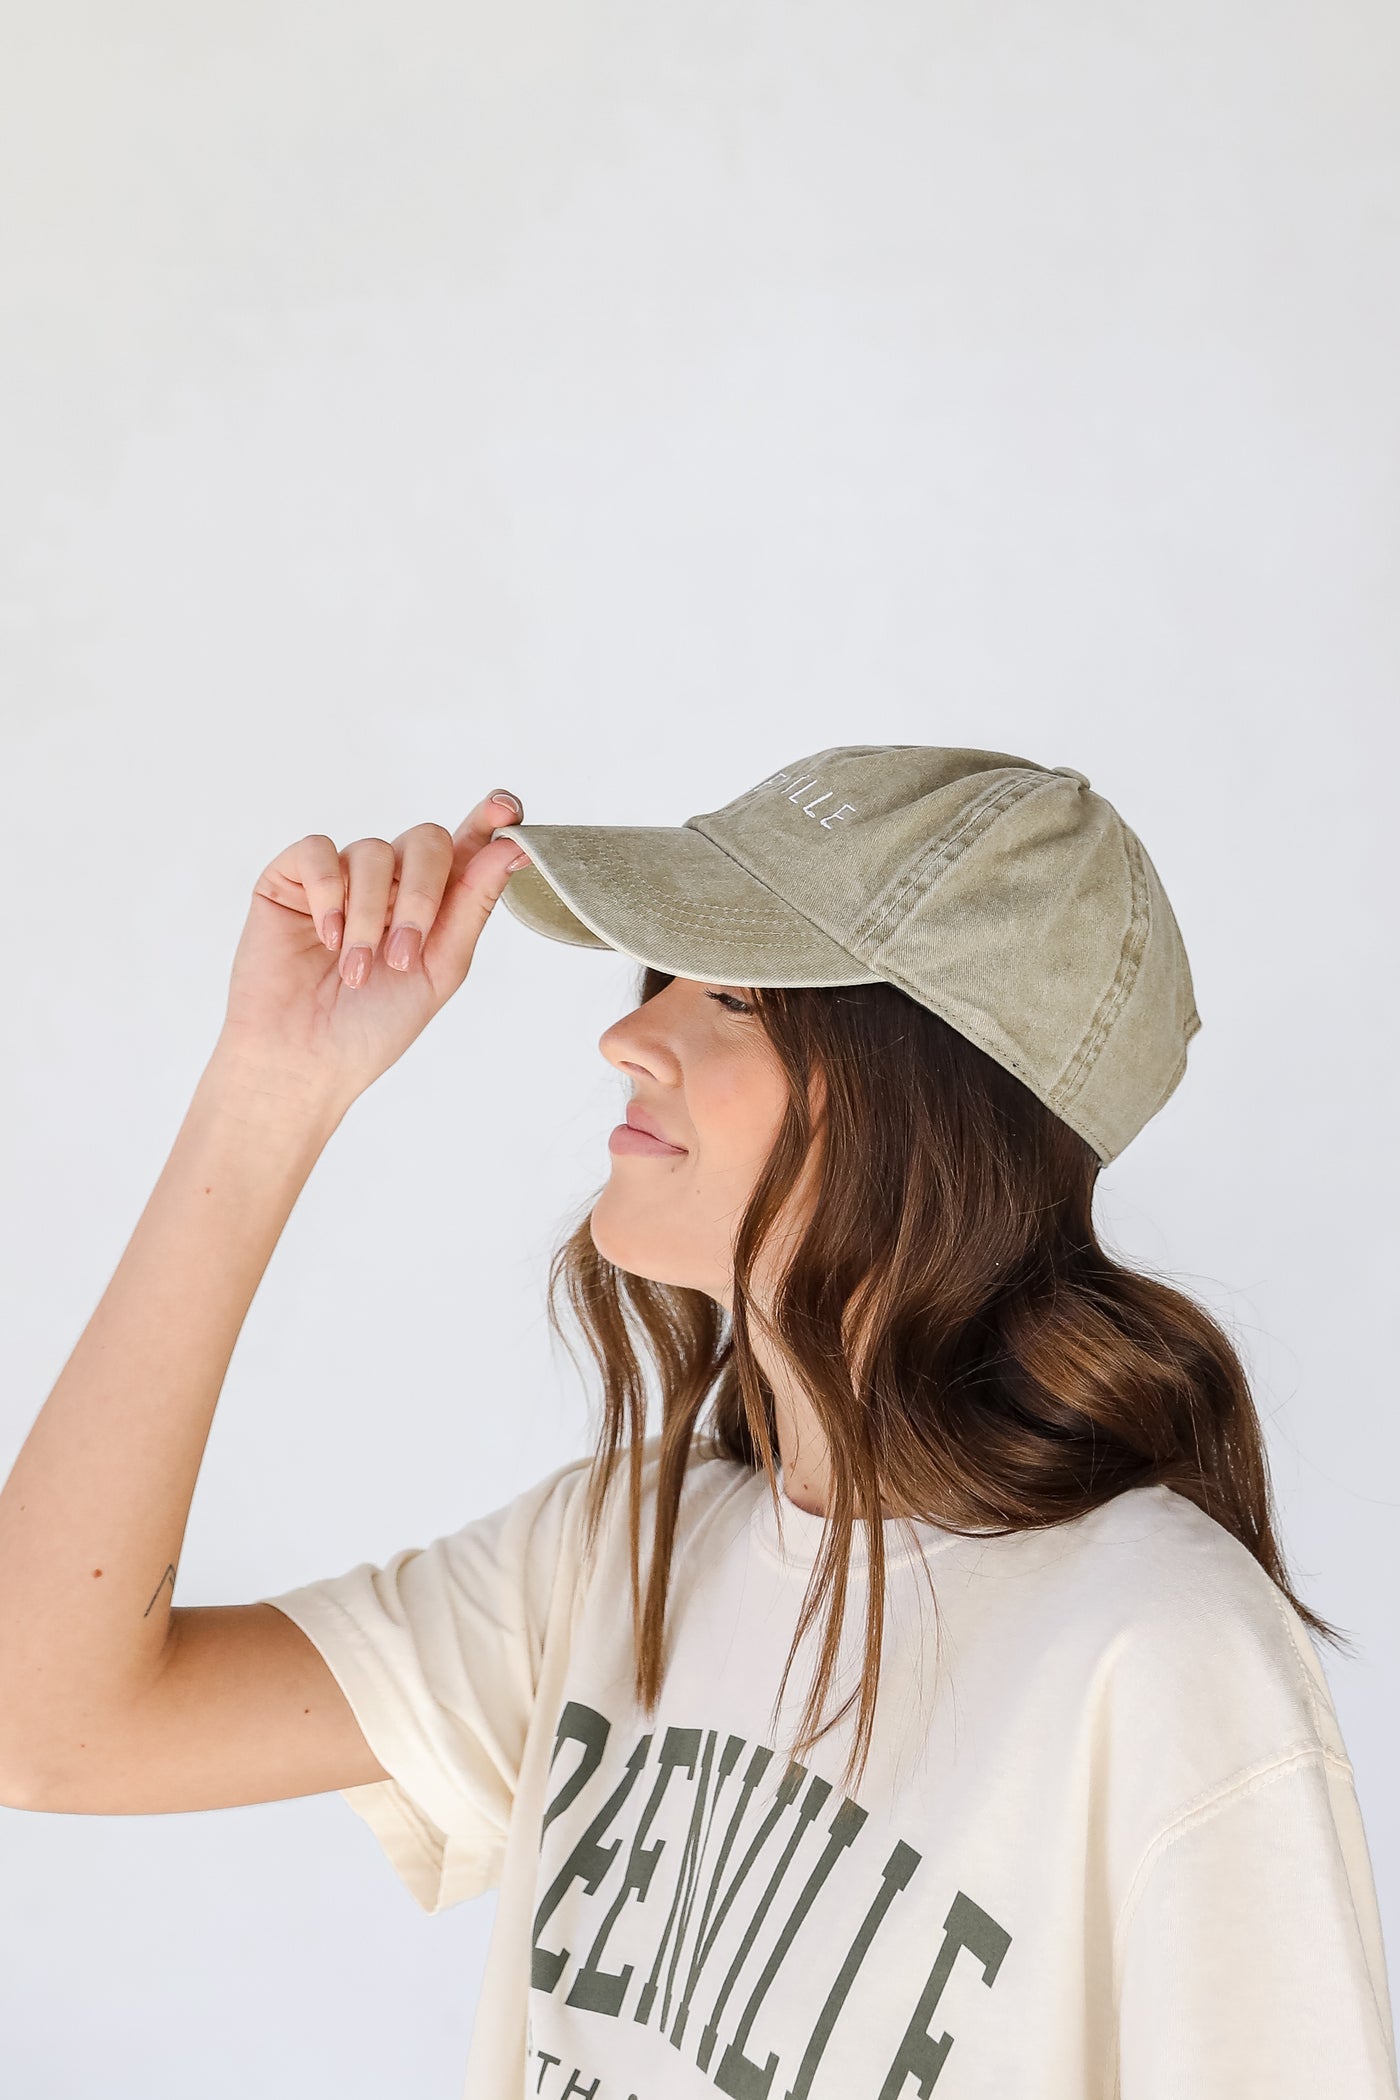 Greenville Embroidered Hat in khaki side view